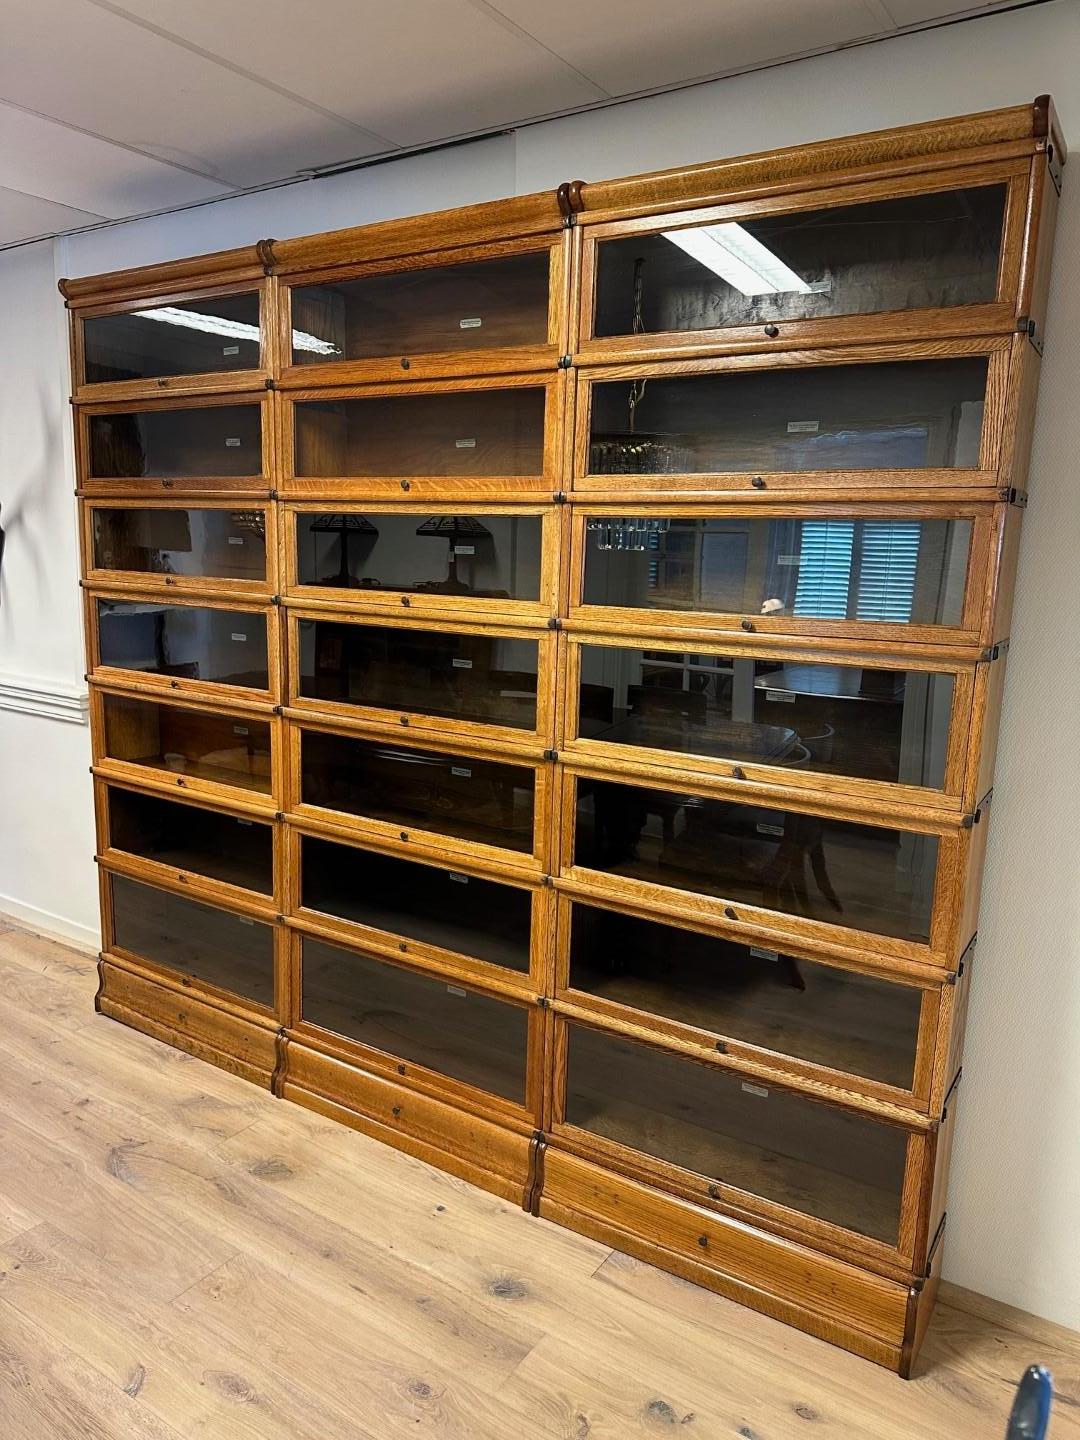 Beautiful antique oak Globe Wernicke bookcase. Completely in perfect condition. The cabinet consists of 21 stackable parts. There are still drawers in the baseboards

Origin: England

Period: Approx. 1895-1910

Size: 260cm x 26cm x 227cm